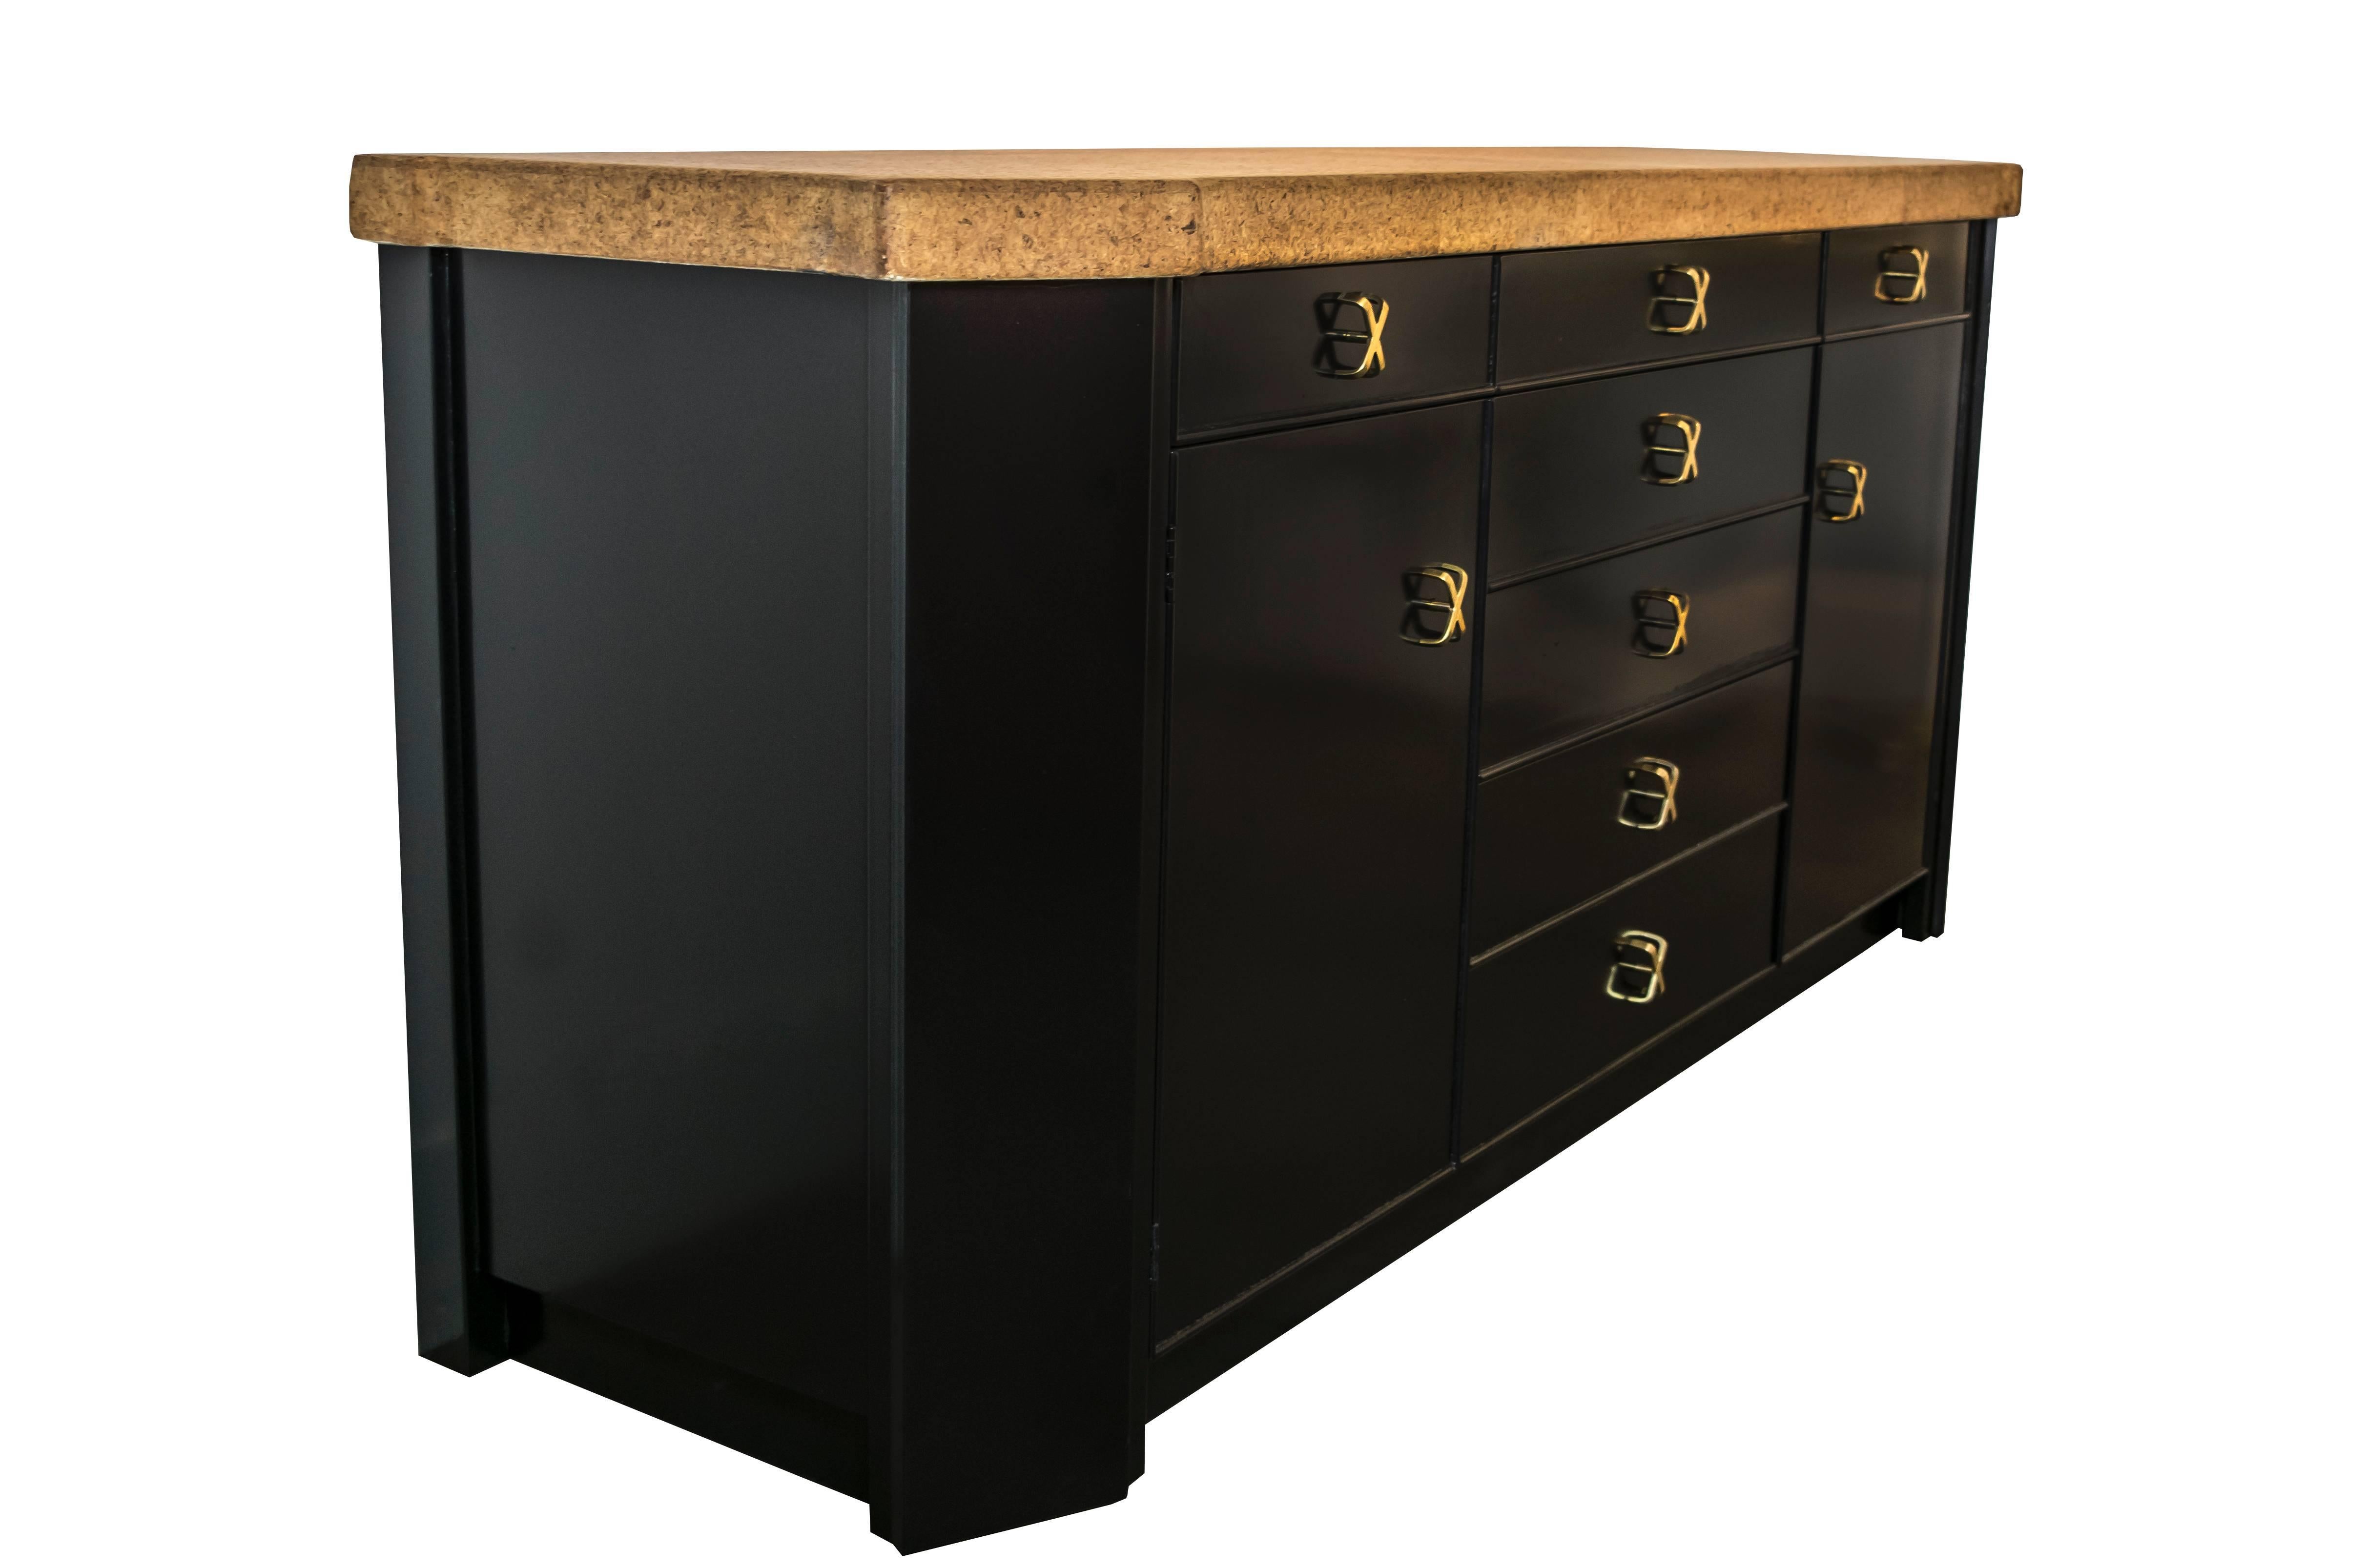 Highly stylized credenza or cabinet designed by Paul Frankl. This cabinet exemplifies Frankl's fine Mid-Century design detailing elegant hardware combining materials such as cork and mahogany with brass accents.